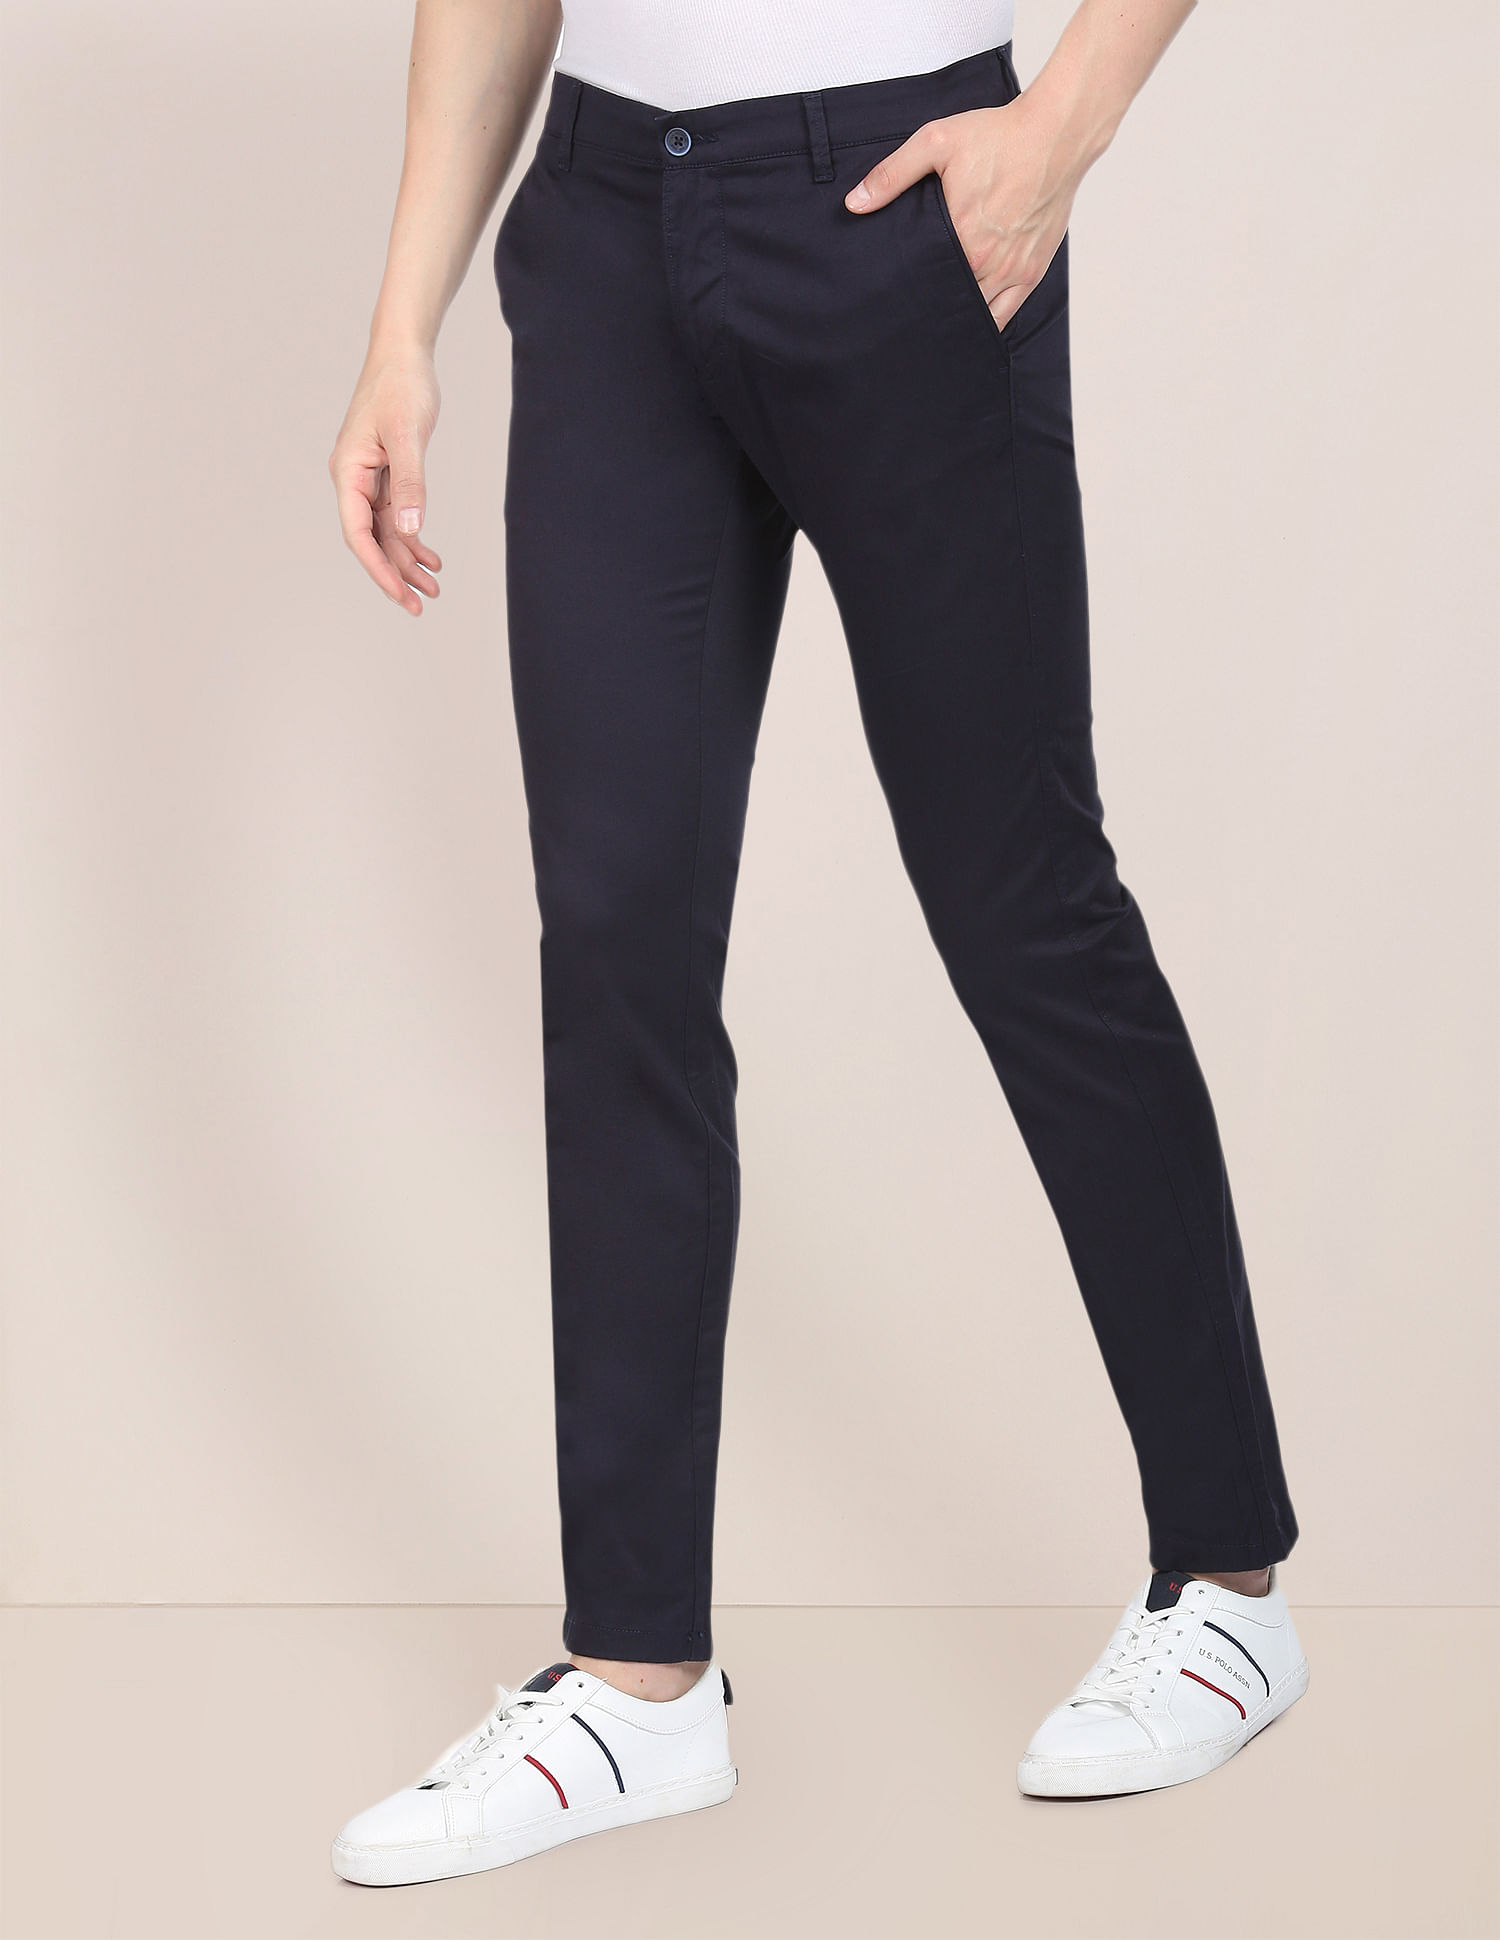 Buy U.S. Polo Assn. Denver Slim Fit Flat Front Casual Trousers - NNNOW.com